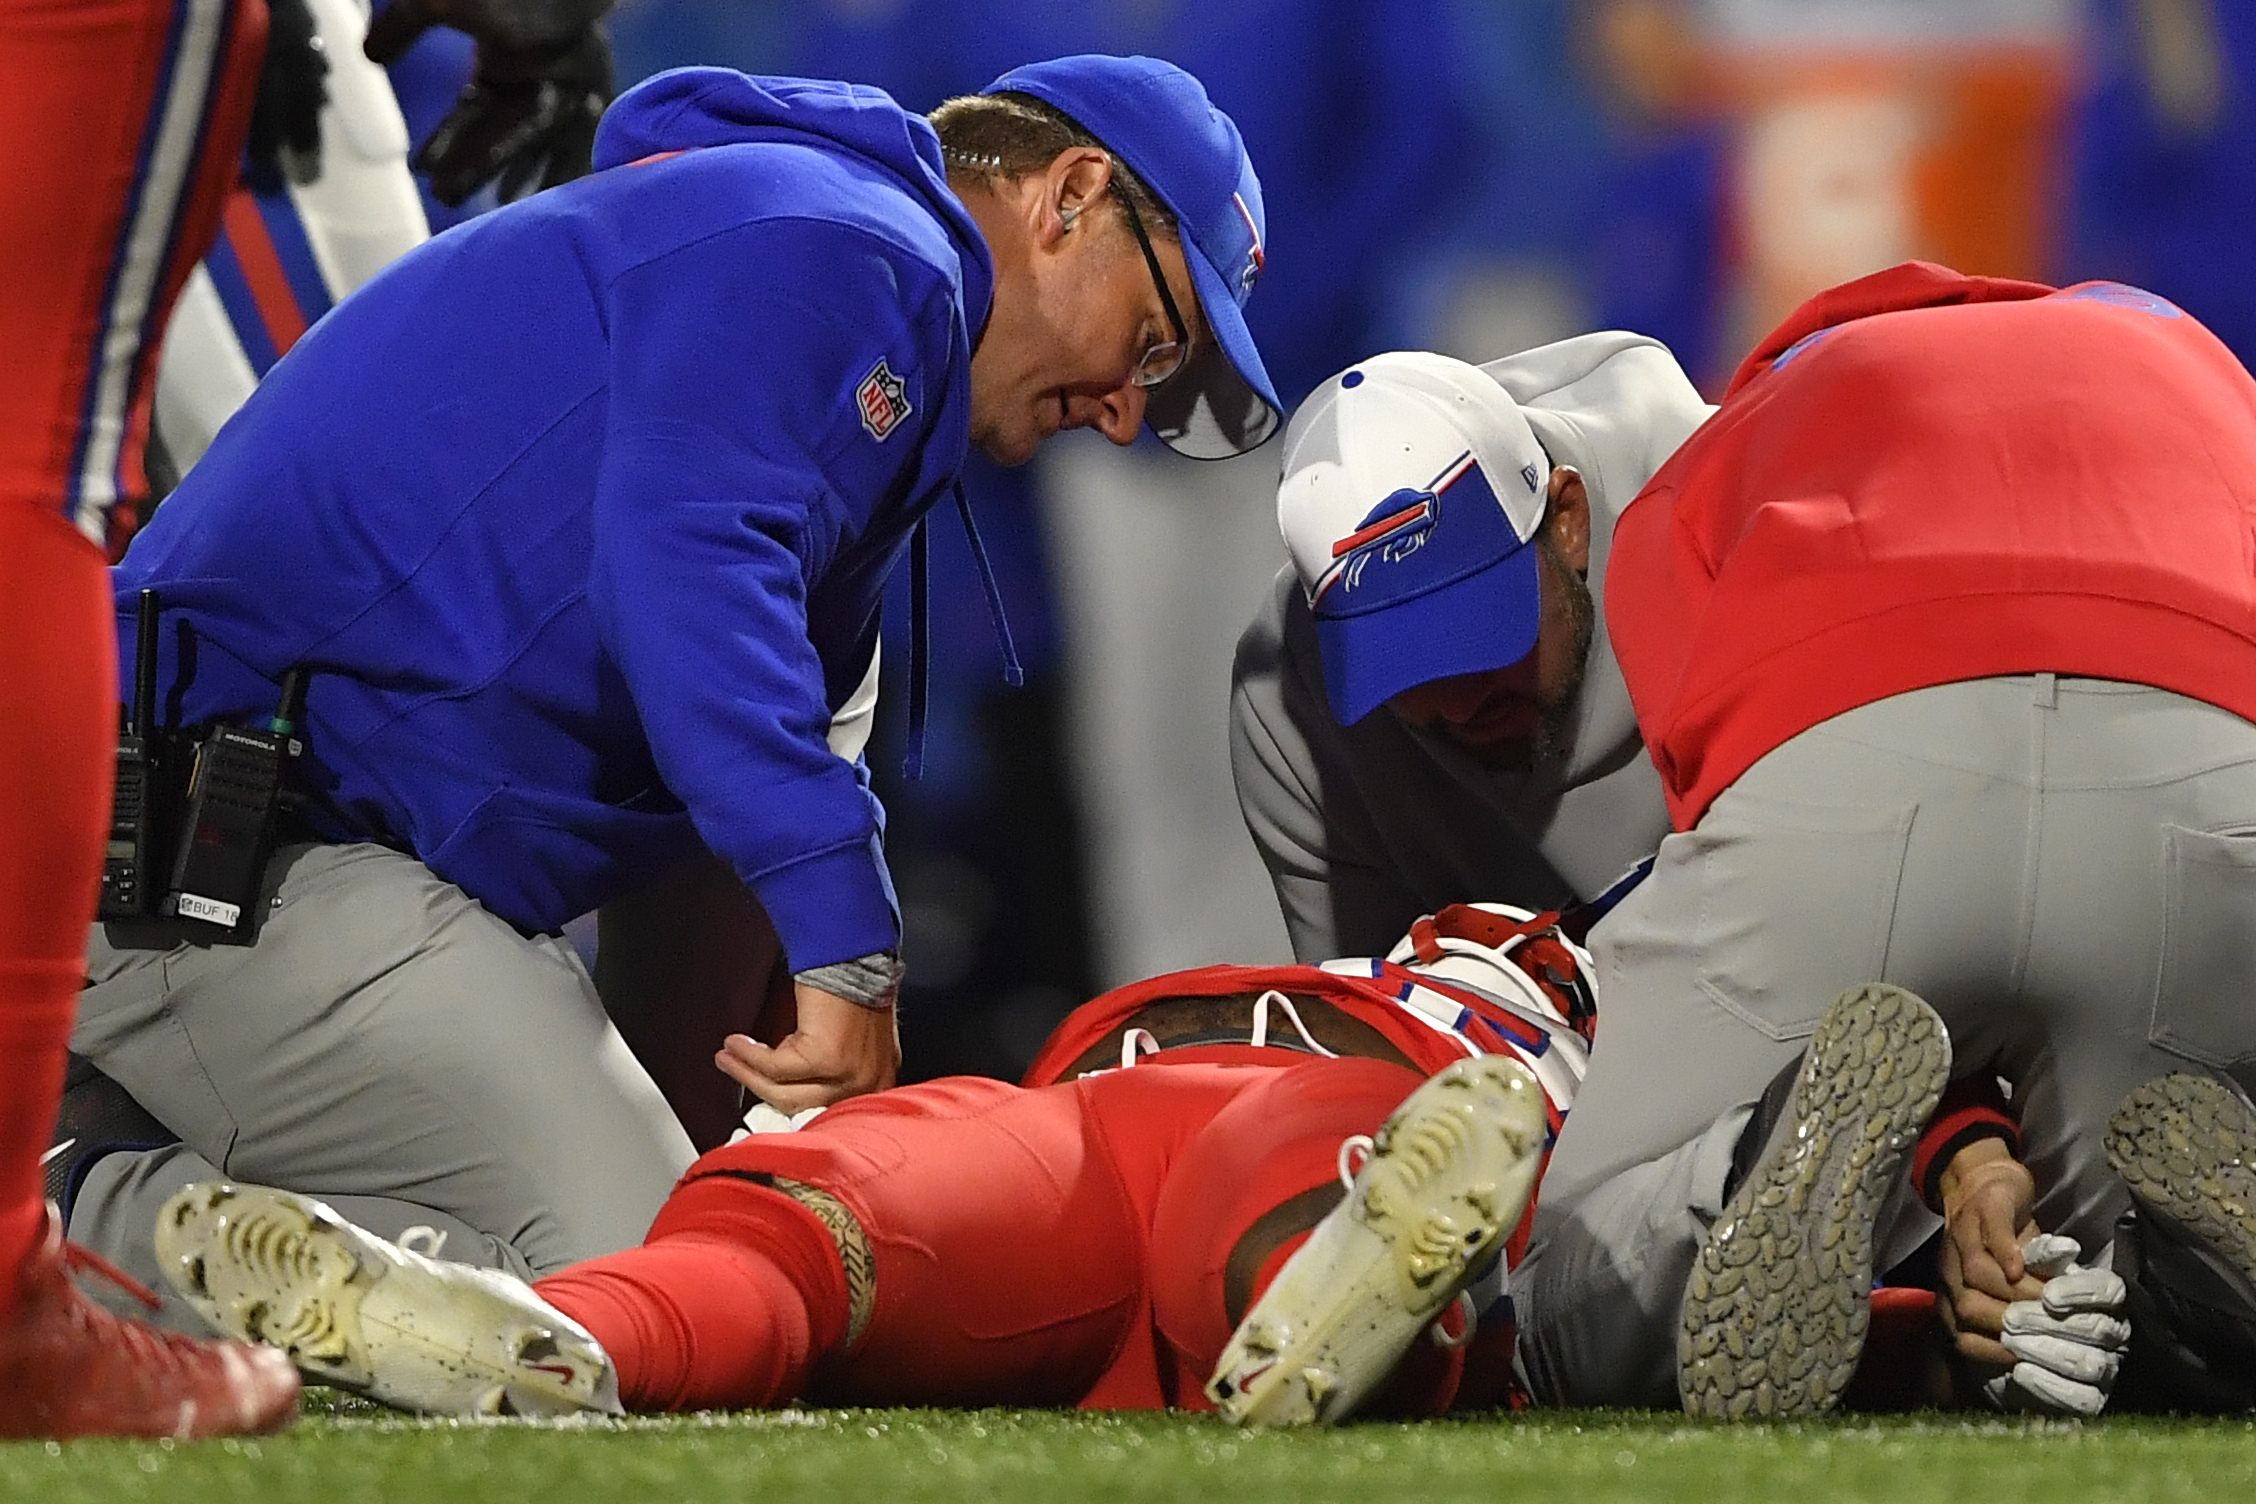 Buffalo Bills running back Damien Harris is attended to by medical staff after taking a hard hit against the New York Giants during the first half of an NFL football game in Orchard Park, N.Y., Sunday, Oct. 15, 2023. (AP Photo/Adrian Kraus)